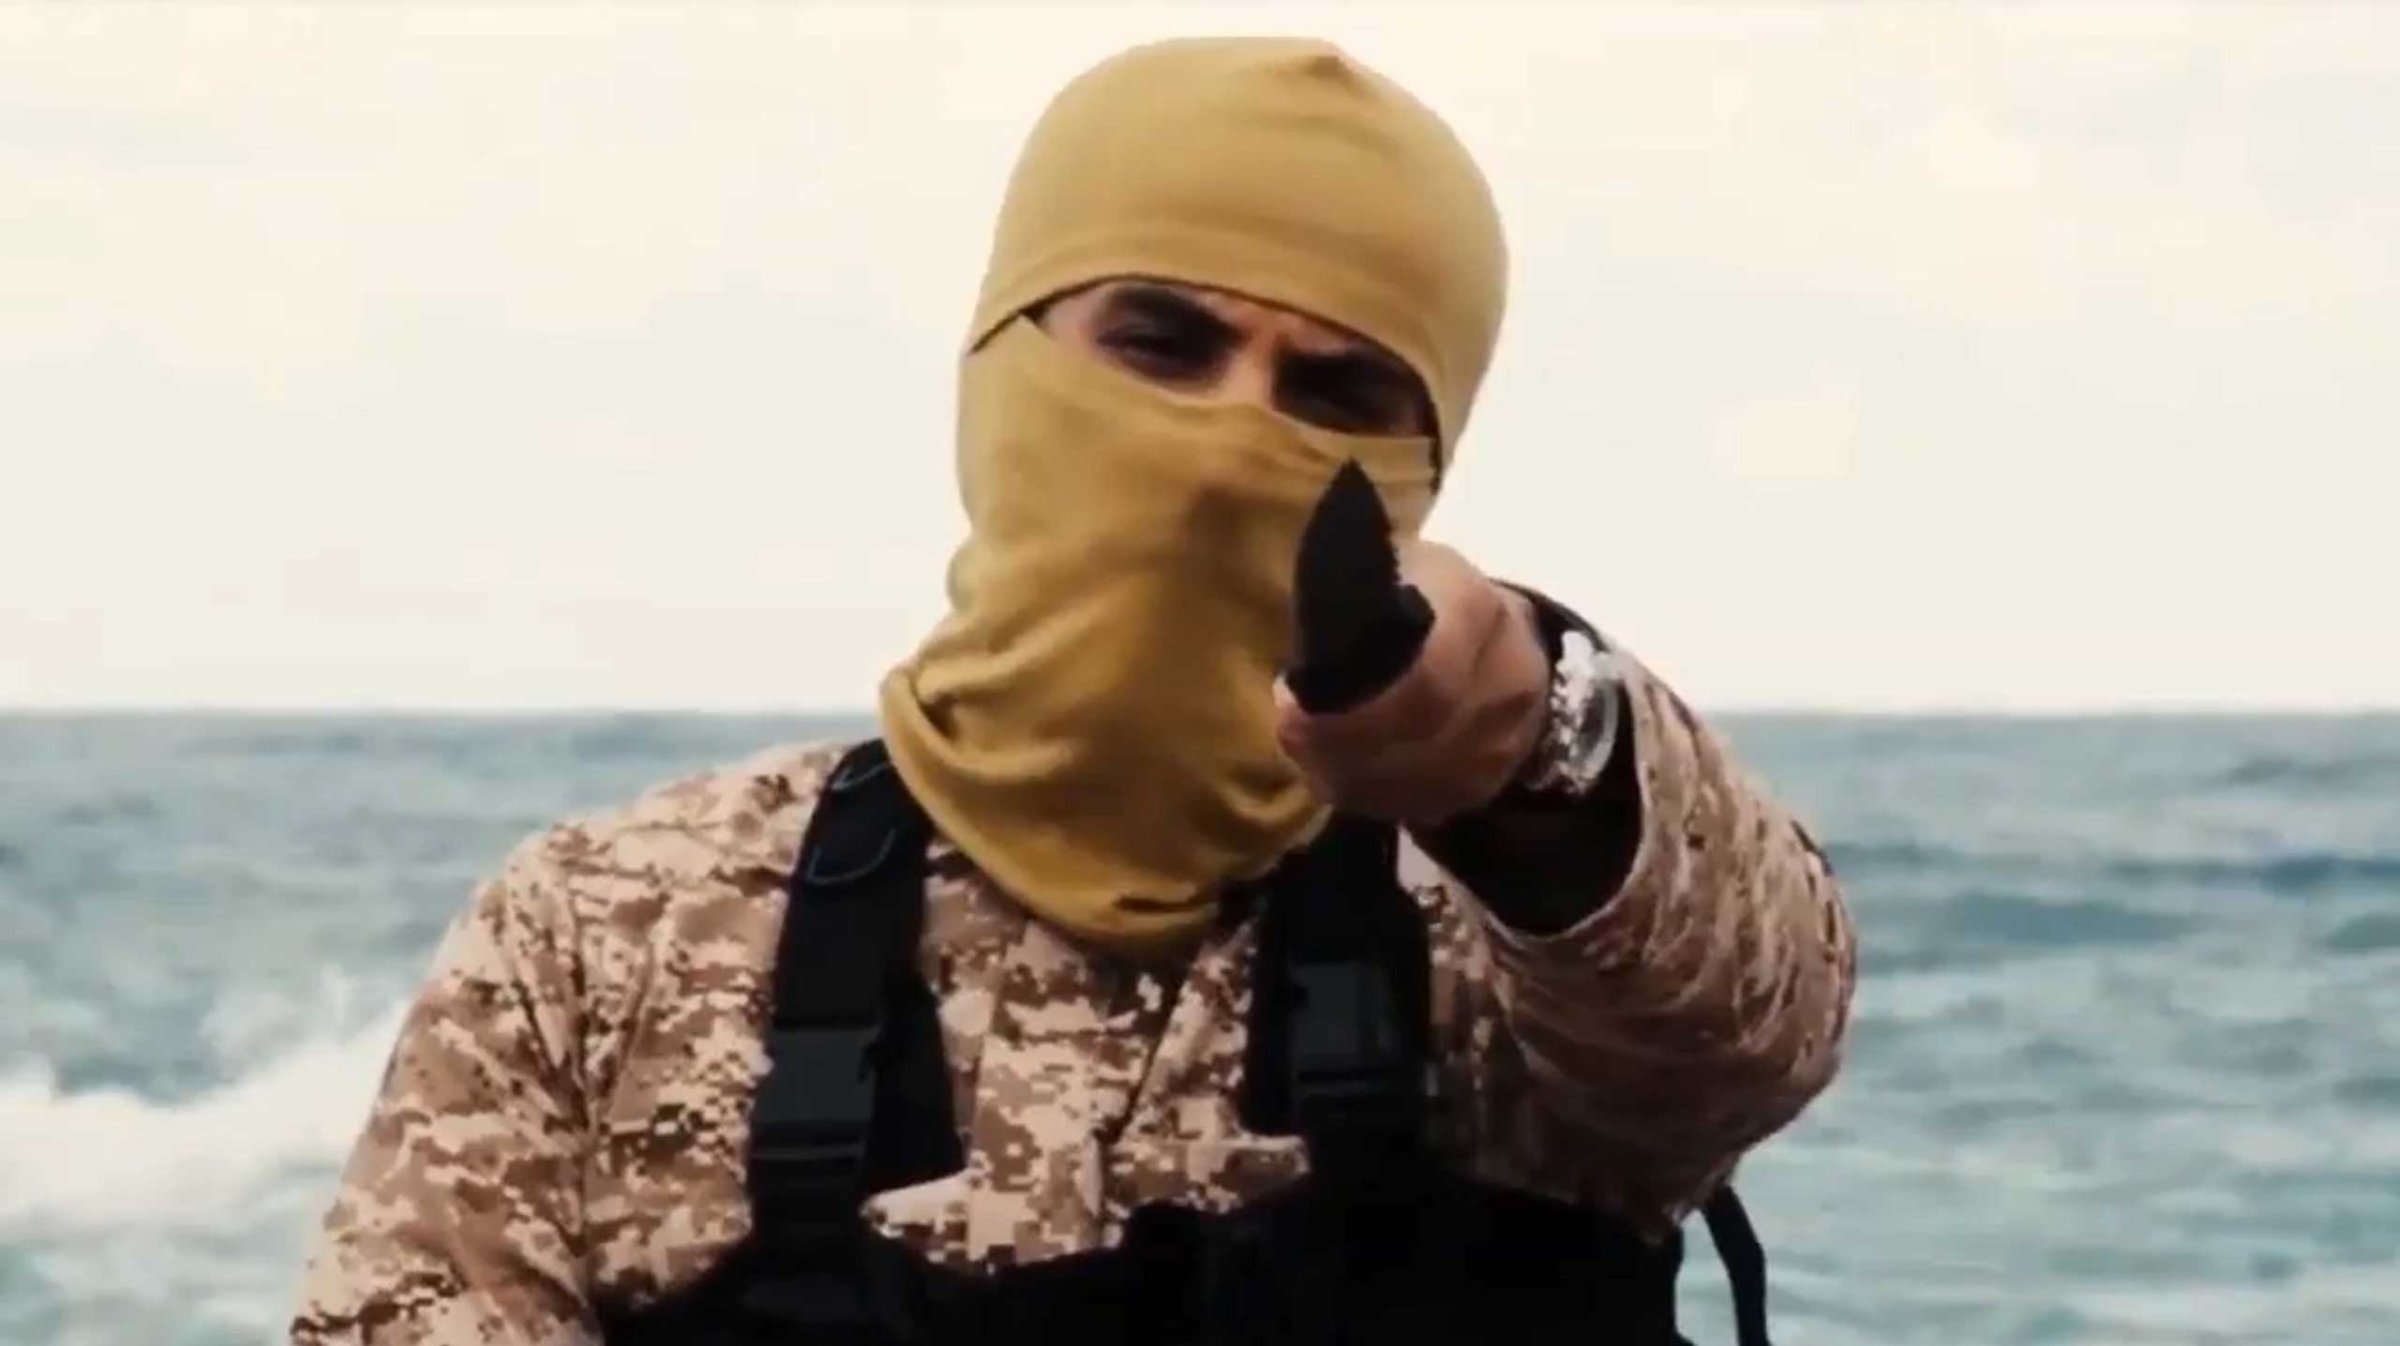 Screengrab from an ISIS video made in Libya and released Feb. 15, 2015.